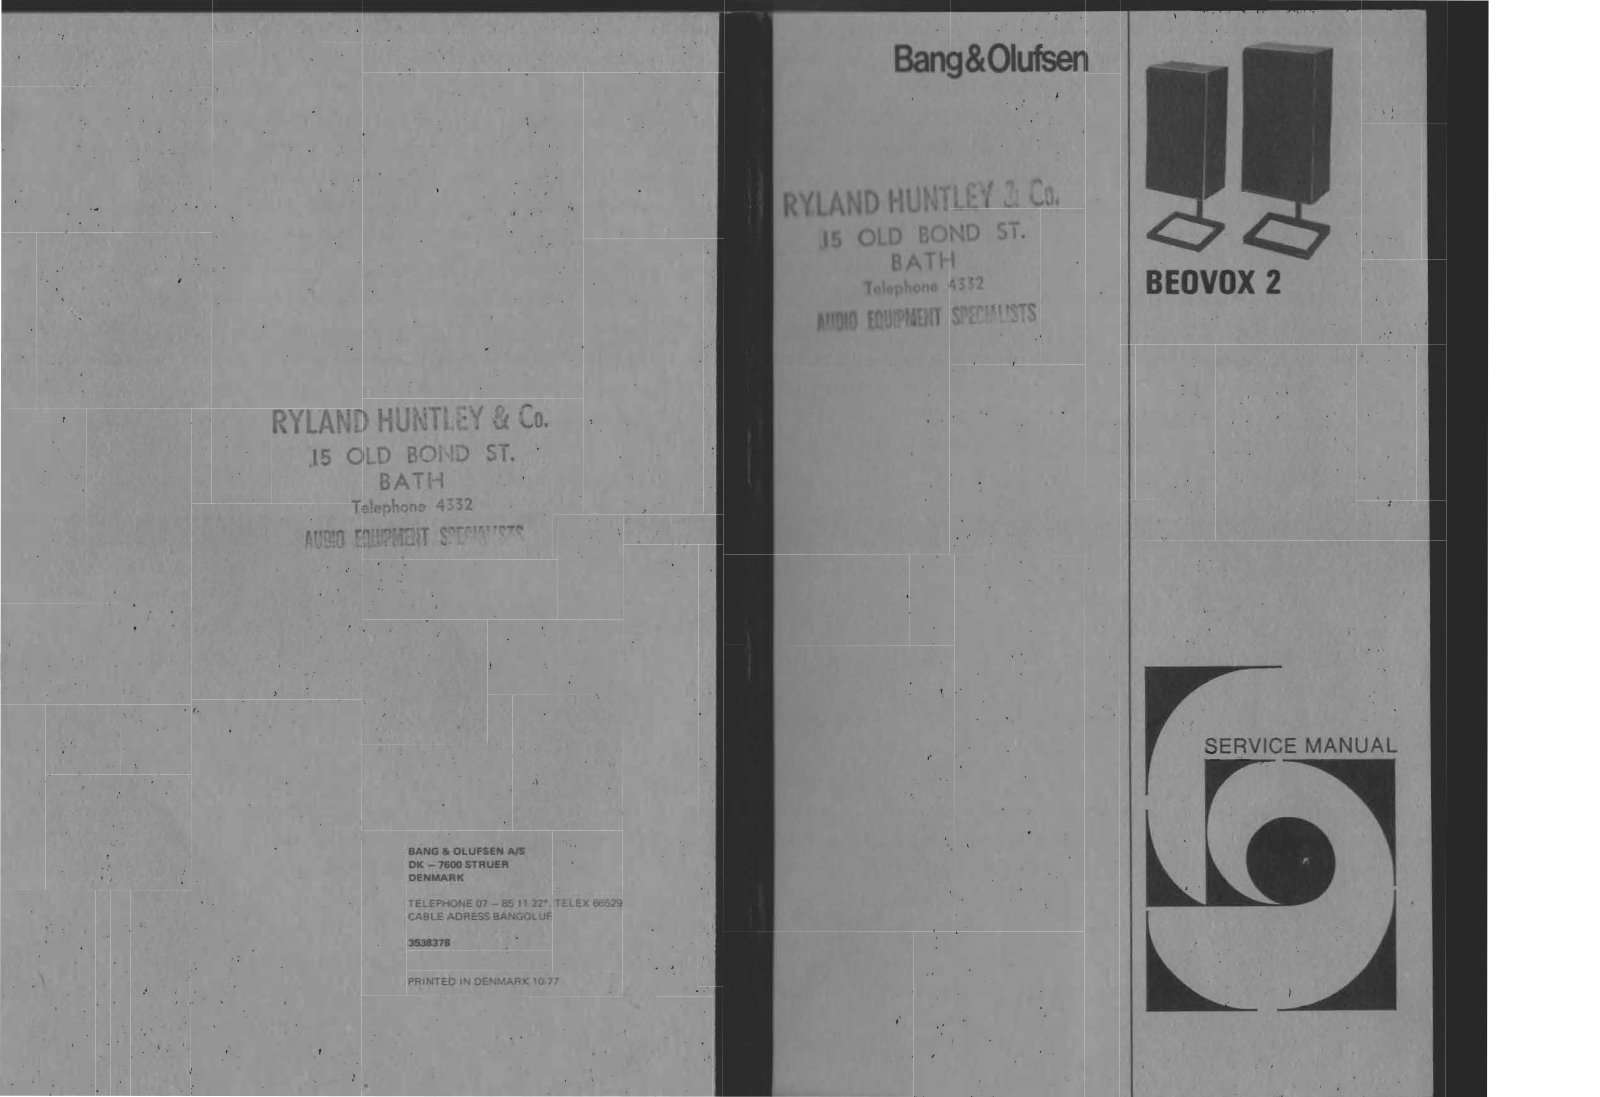 Bang & Olufsen Beovox S-75 Service Manual